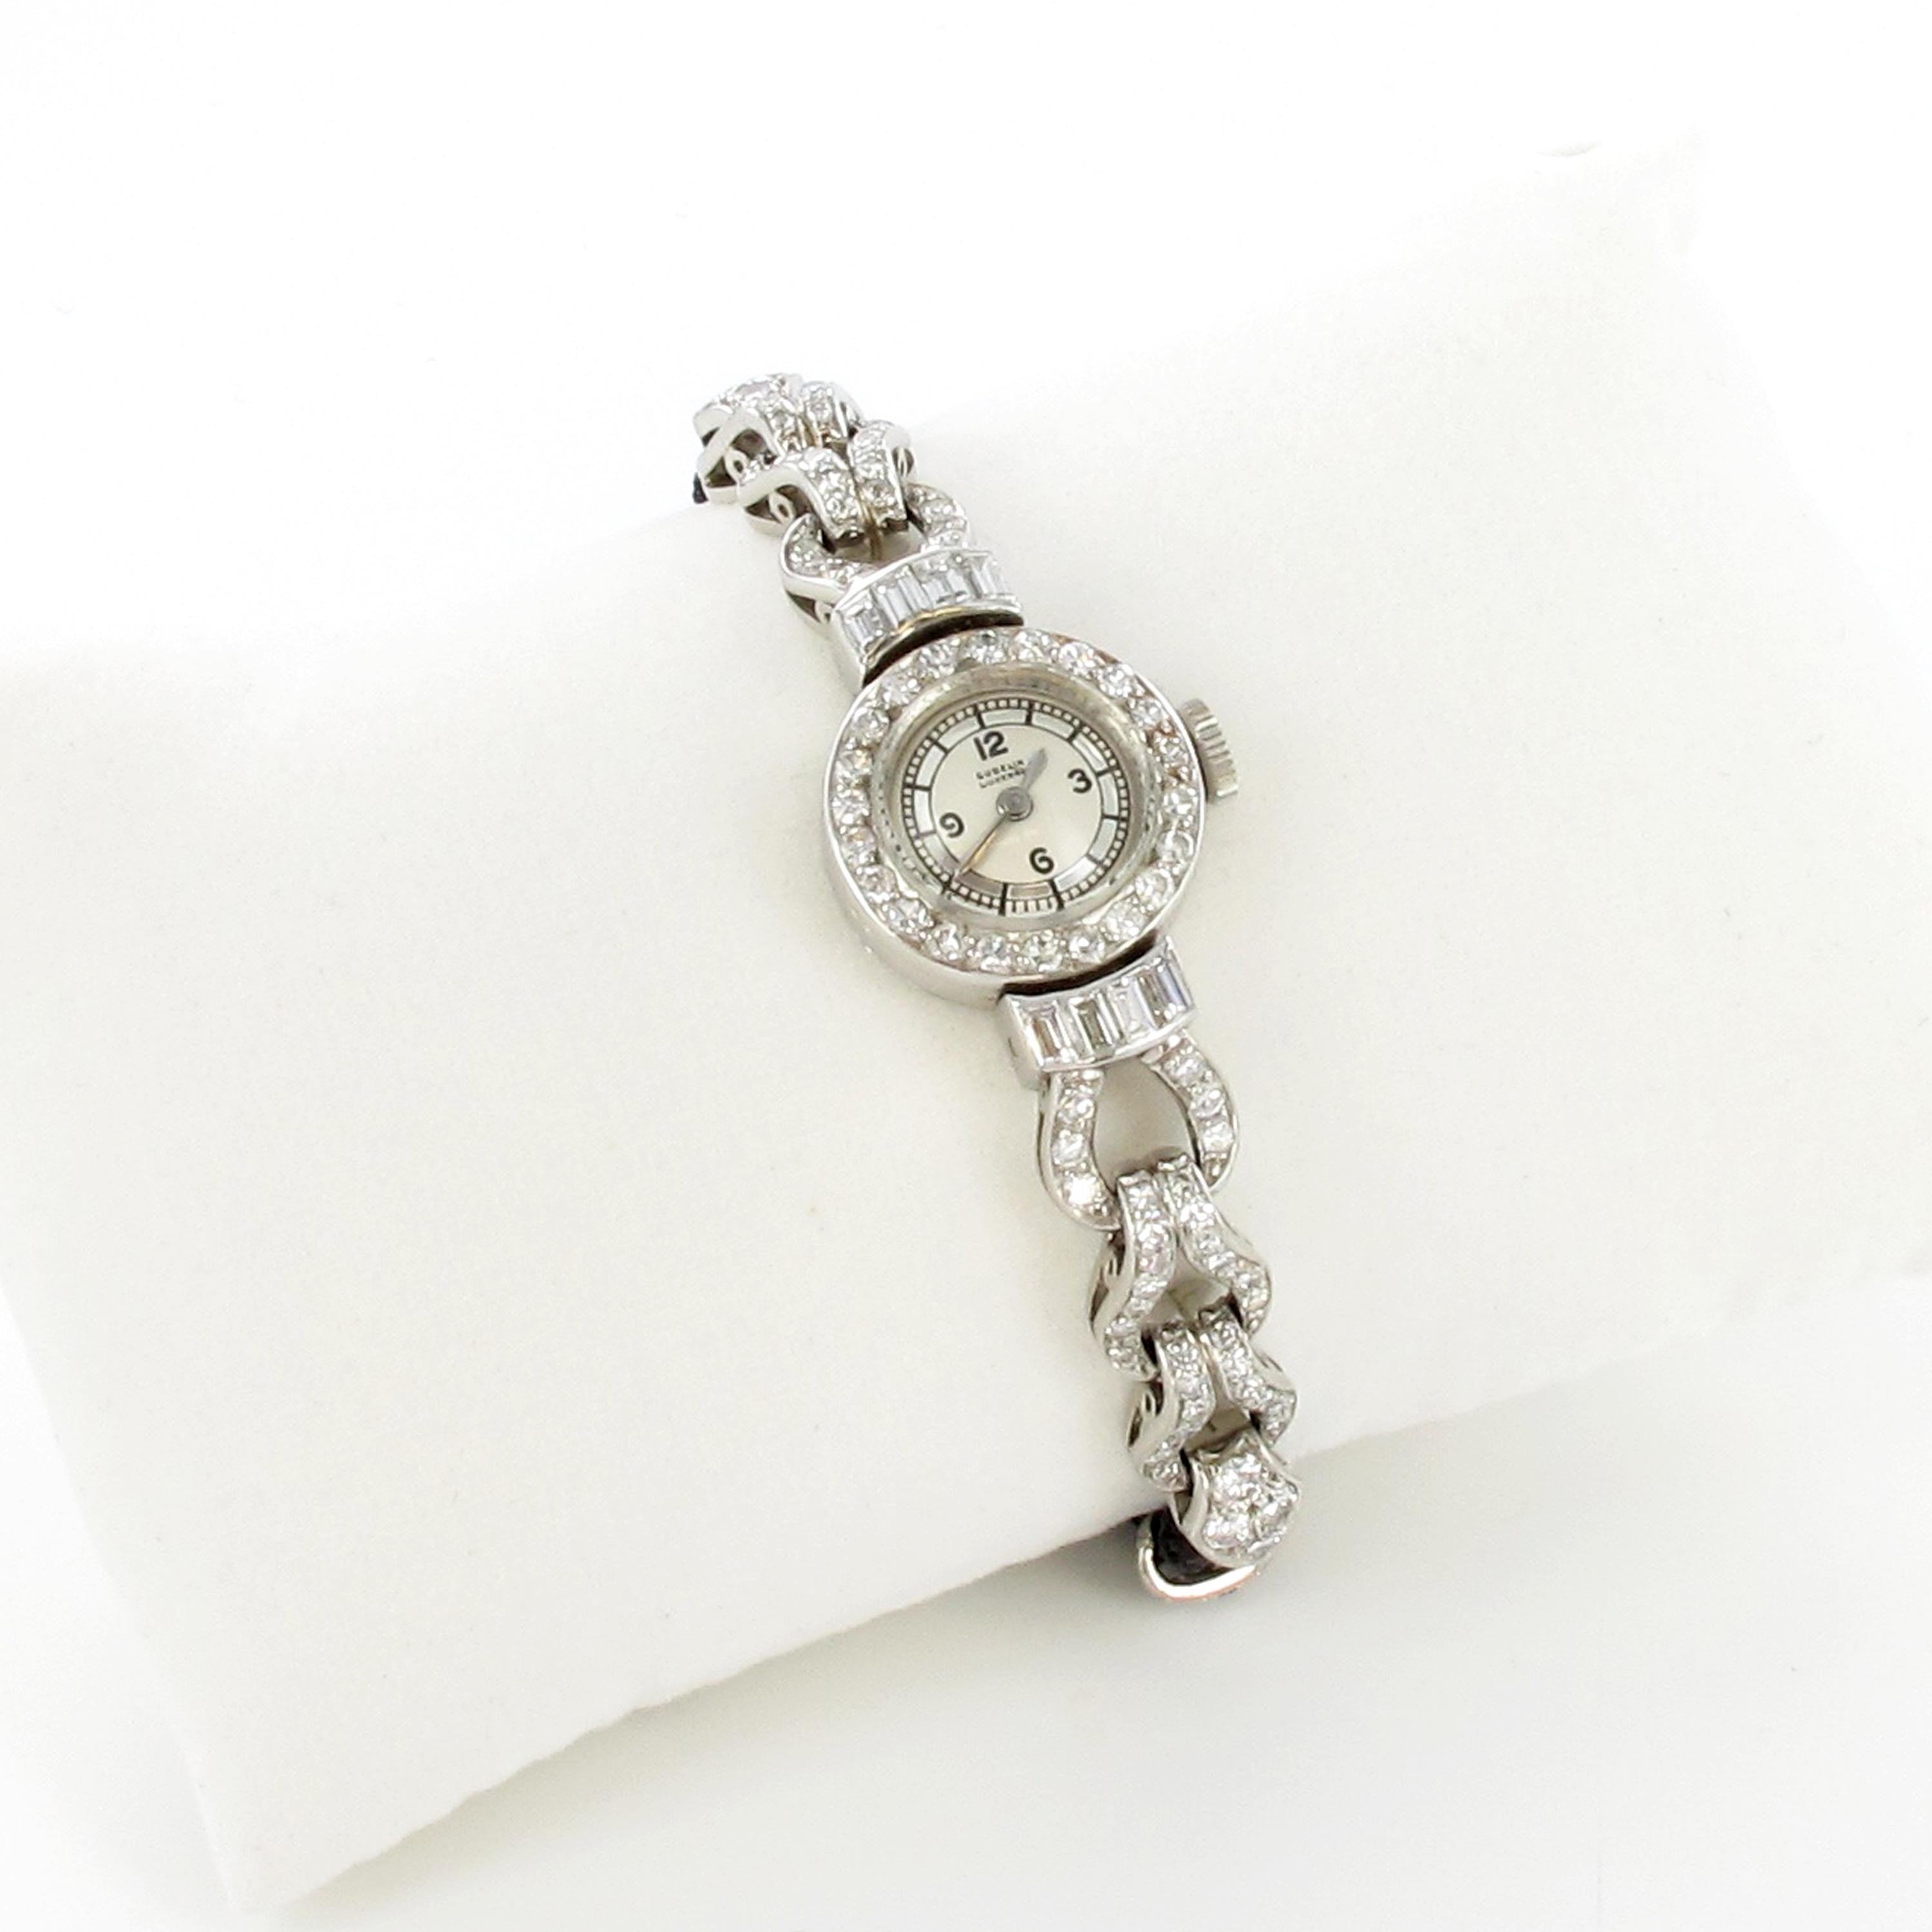 Women's or Men's Art Deco Diamond Watch by Gübelin in Platinum 950 and White Gold 750 For Sale